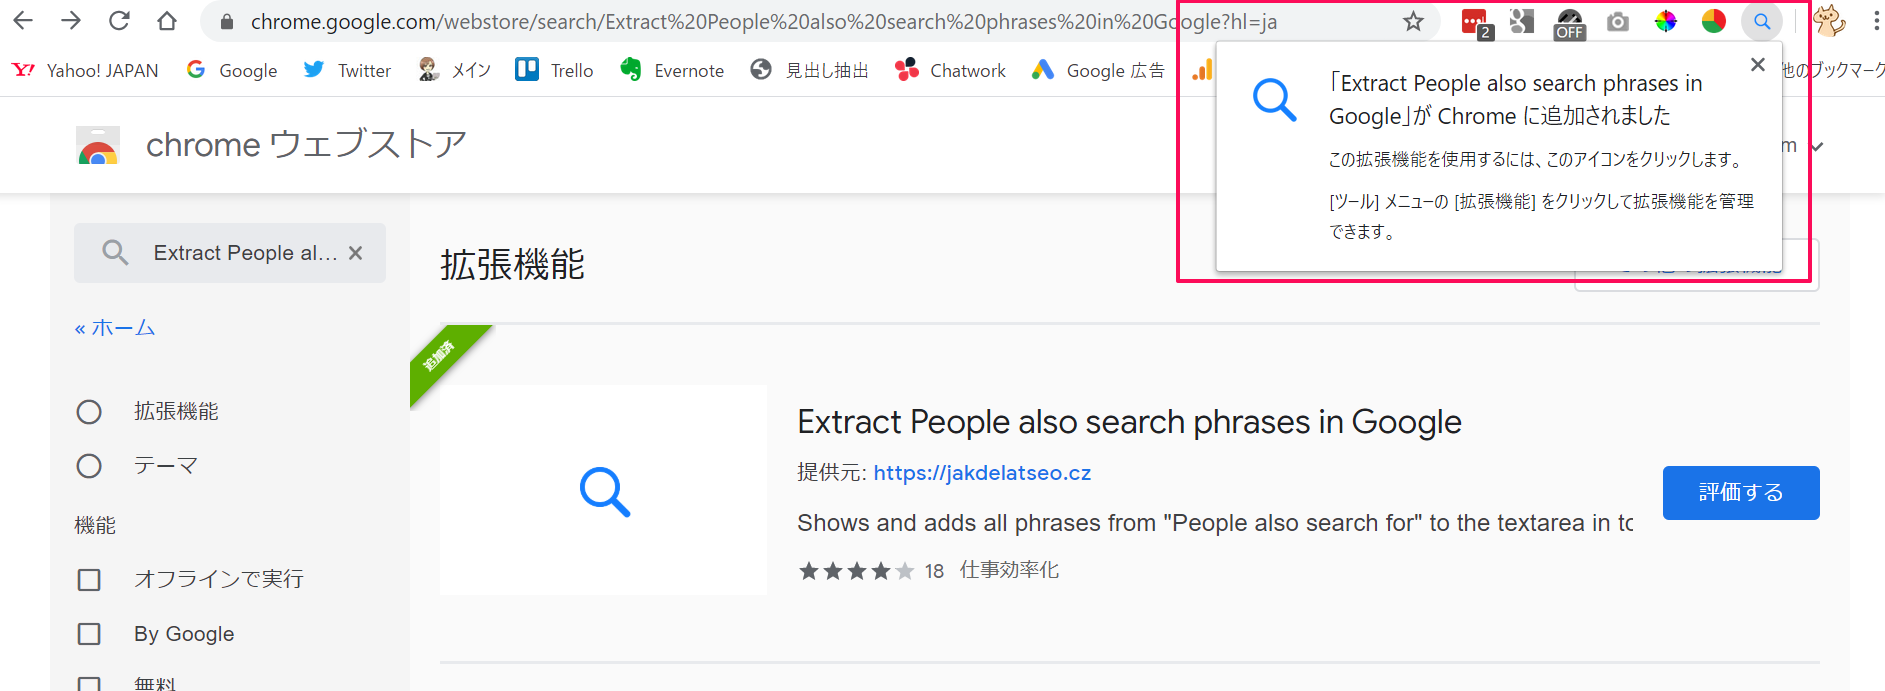 Extract People also search phrases in Google